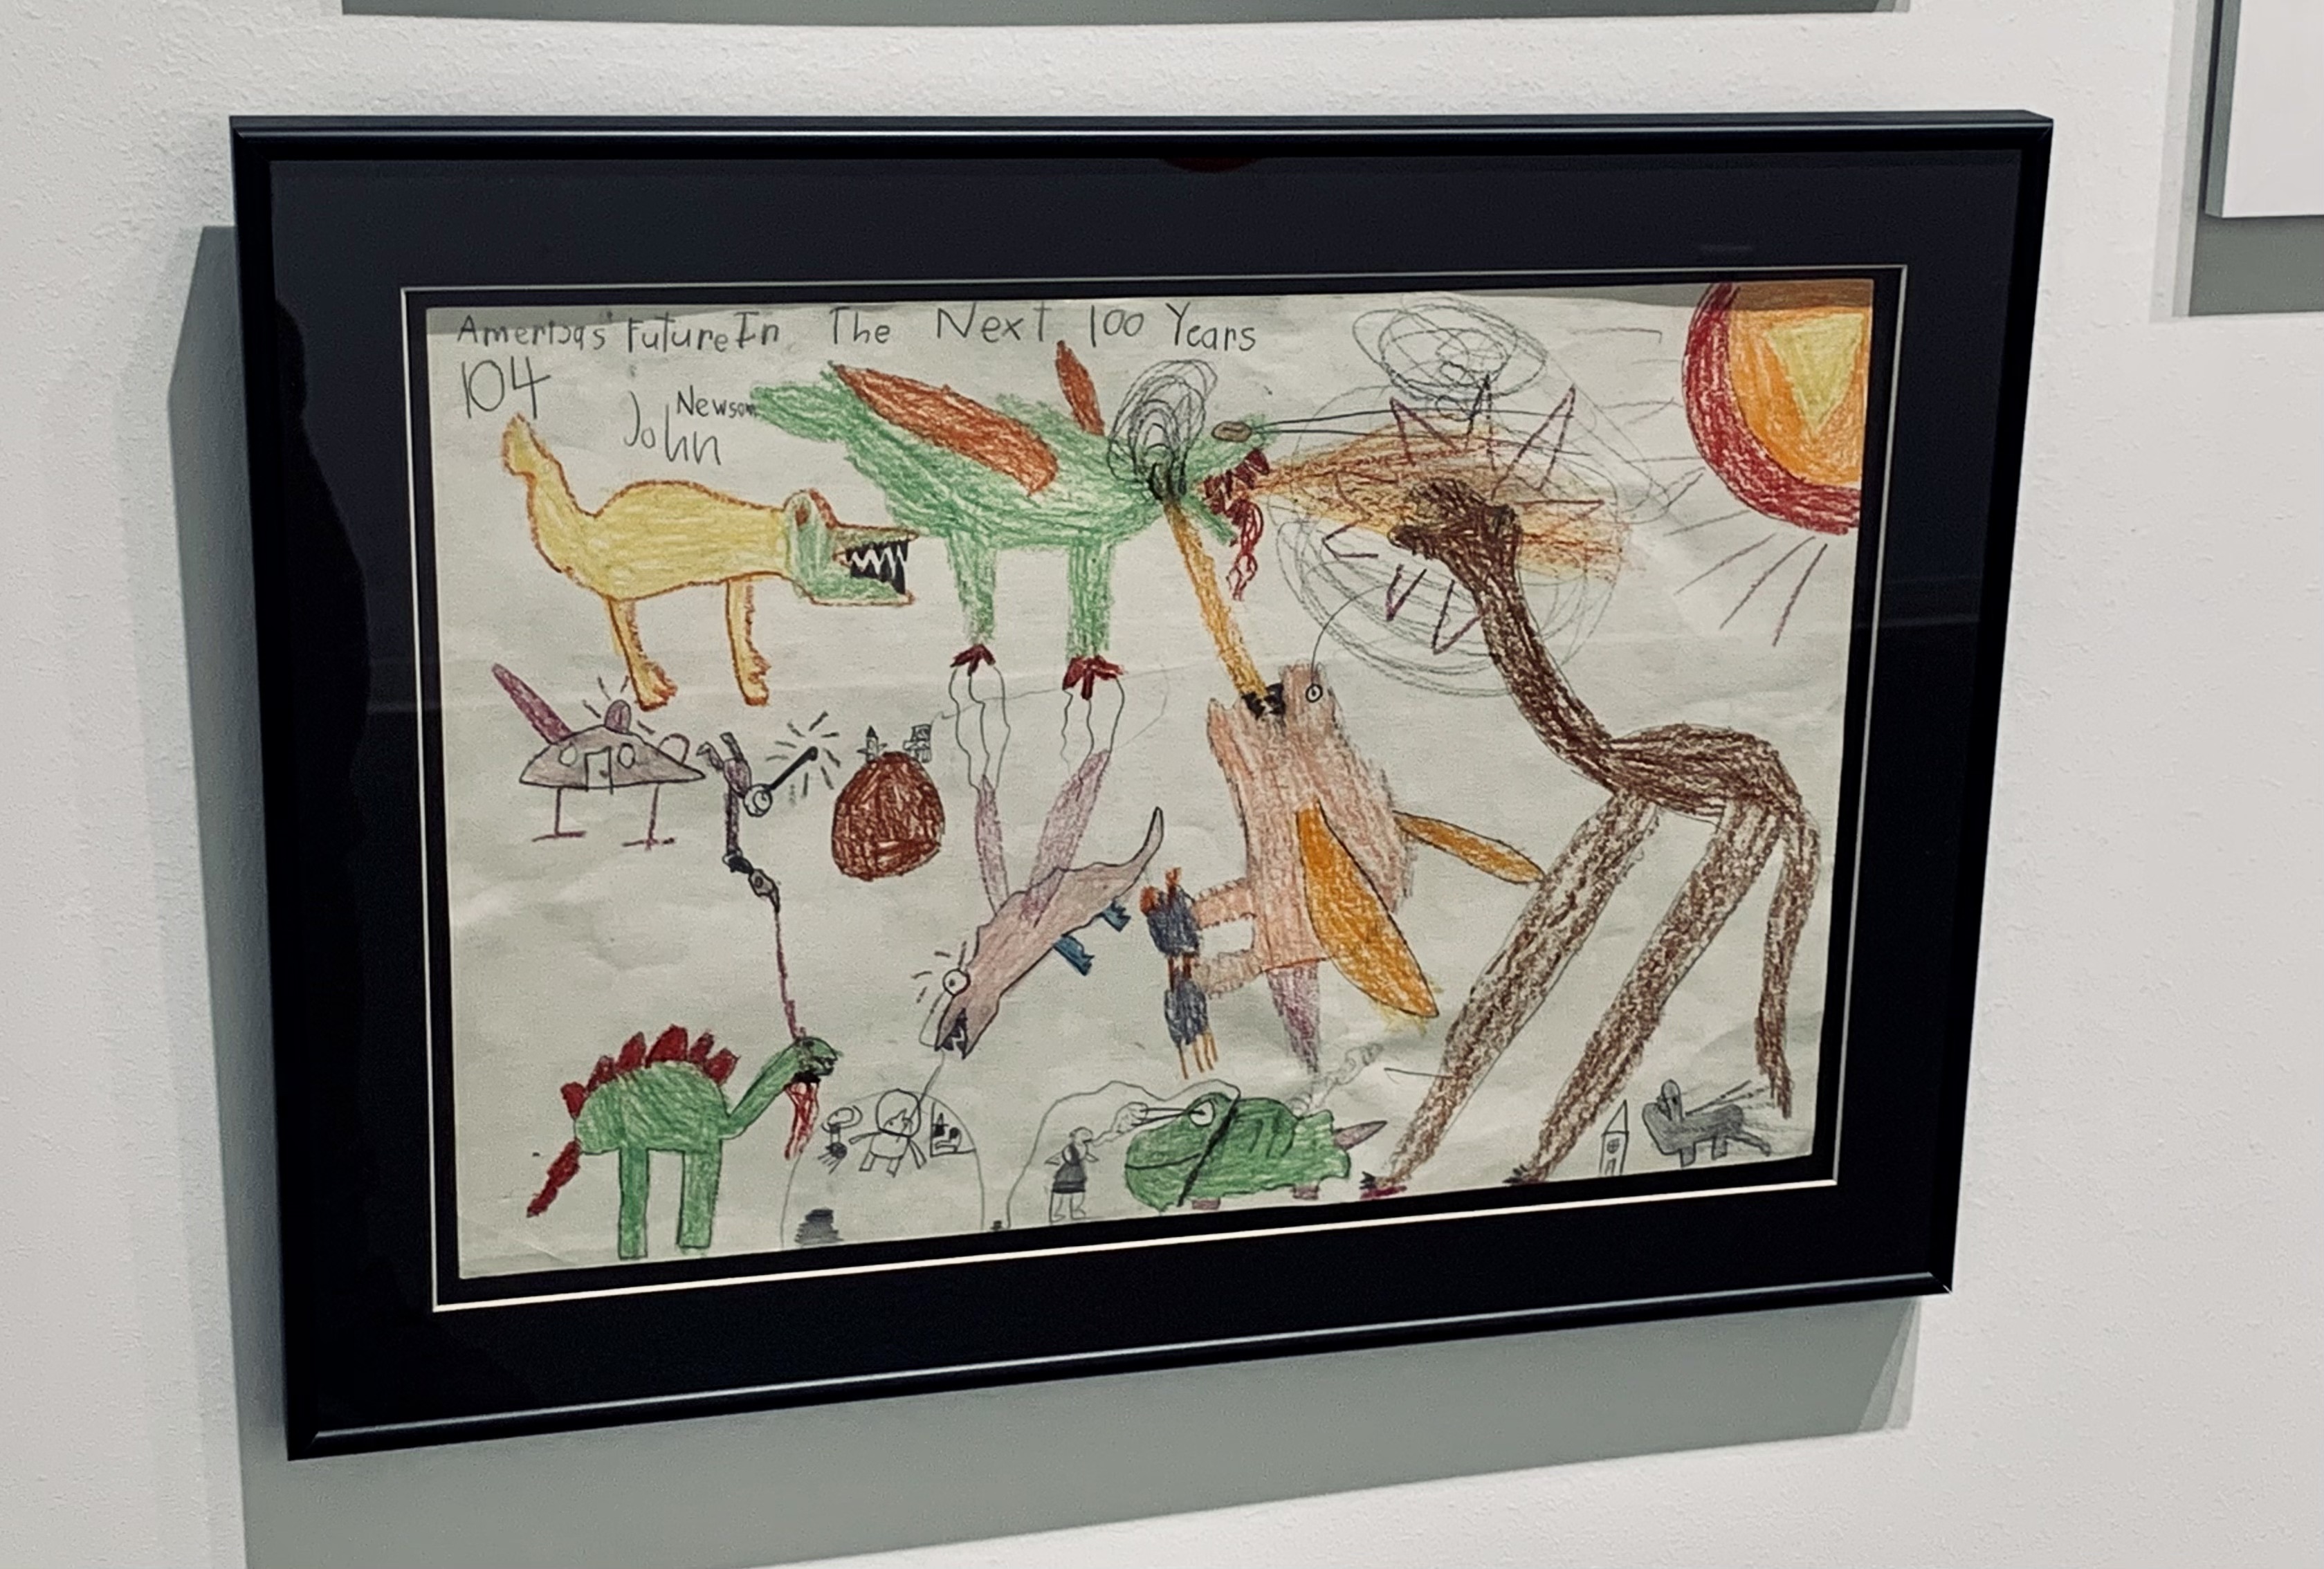 A drawing in a black frame hangs on the wall. Kid-like characters are drawn, some look like dinosaurs, some flying beasts, in bright purples and reds and greens.